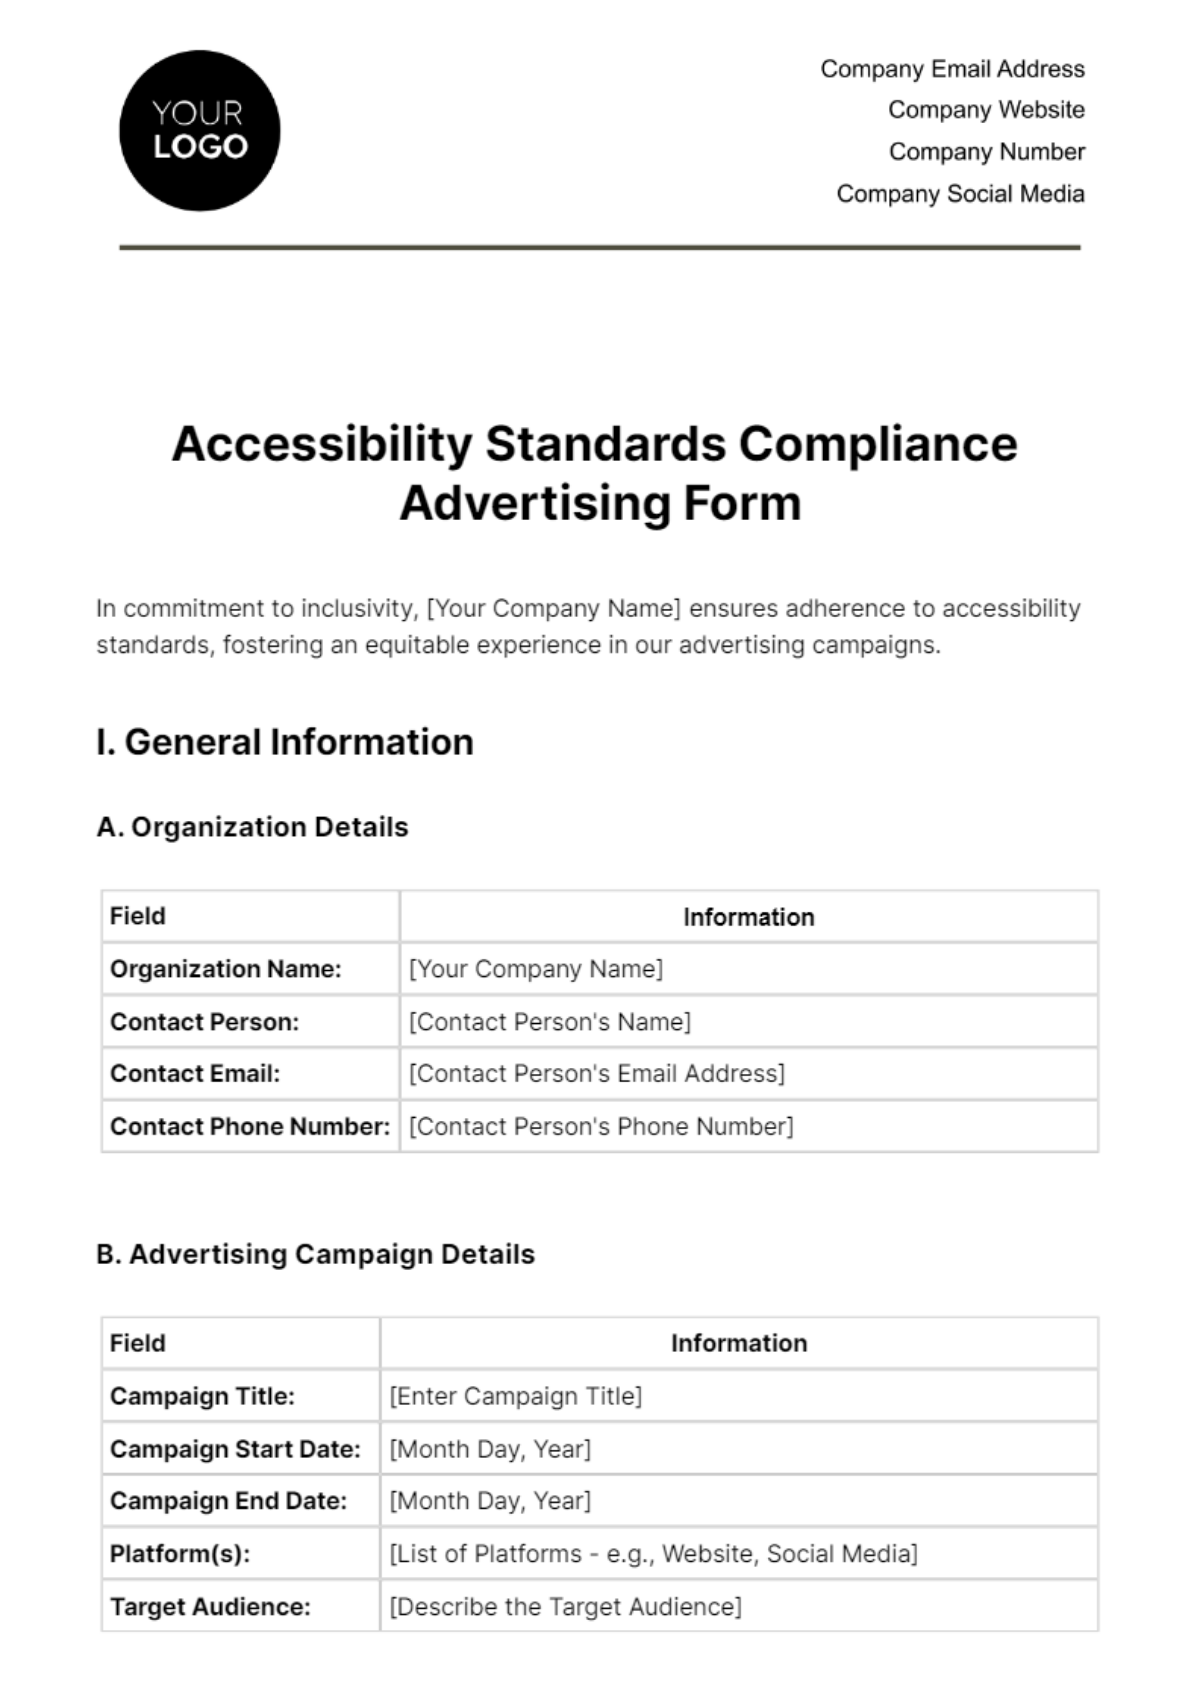 Accessibility Standards Compliance Advertising Form Template